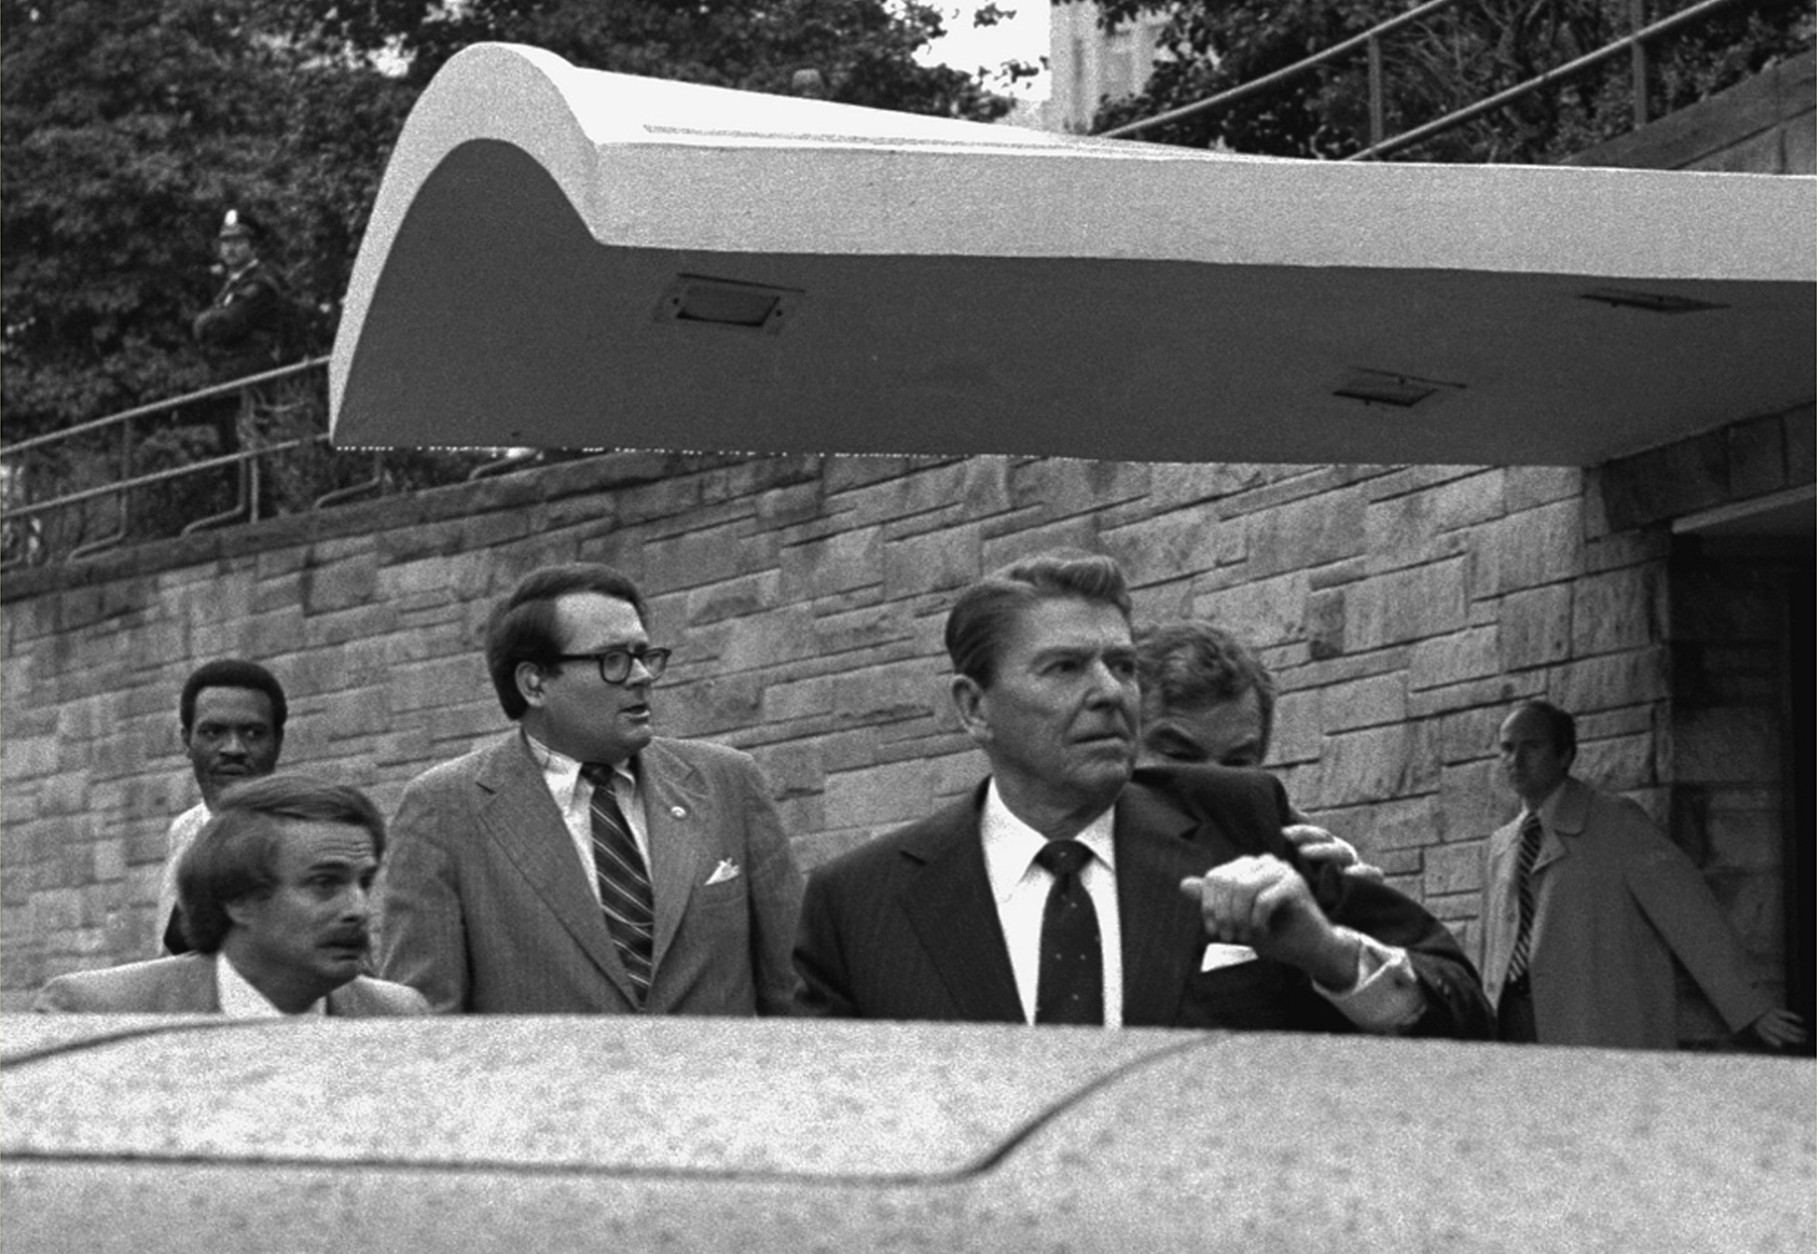 U.S. President Ronald Reagan looks to his left and holds up his left arm as a secret service agent places a hand on his shoulder and pushes the President into his limousine after he was shot leaving a Washington hotel, Monday, March 30, 1981. (AP Photo/Ron Edmonds)